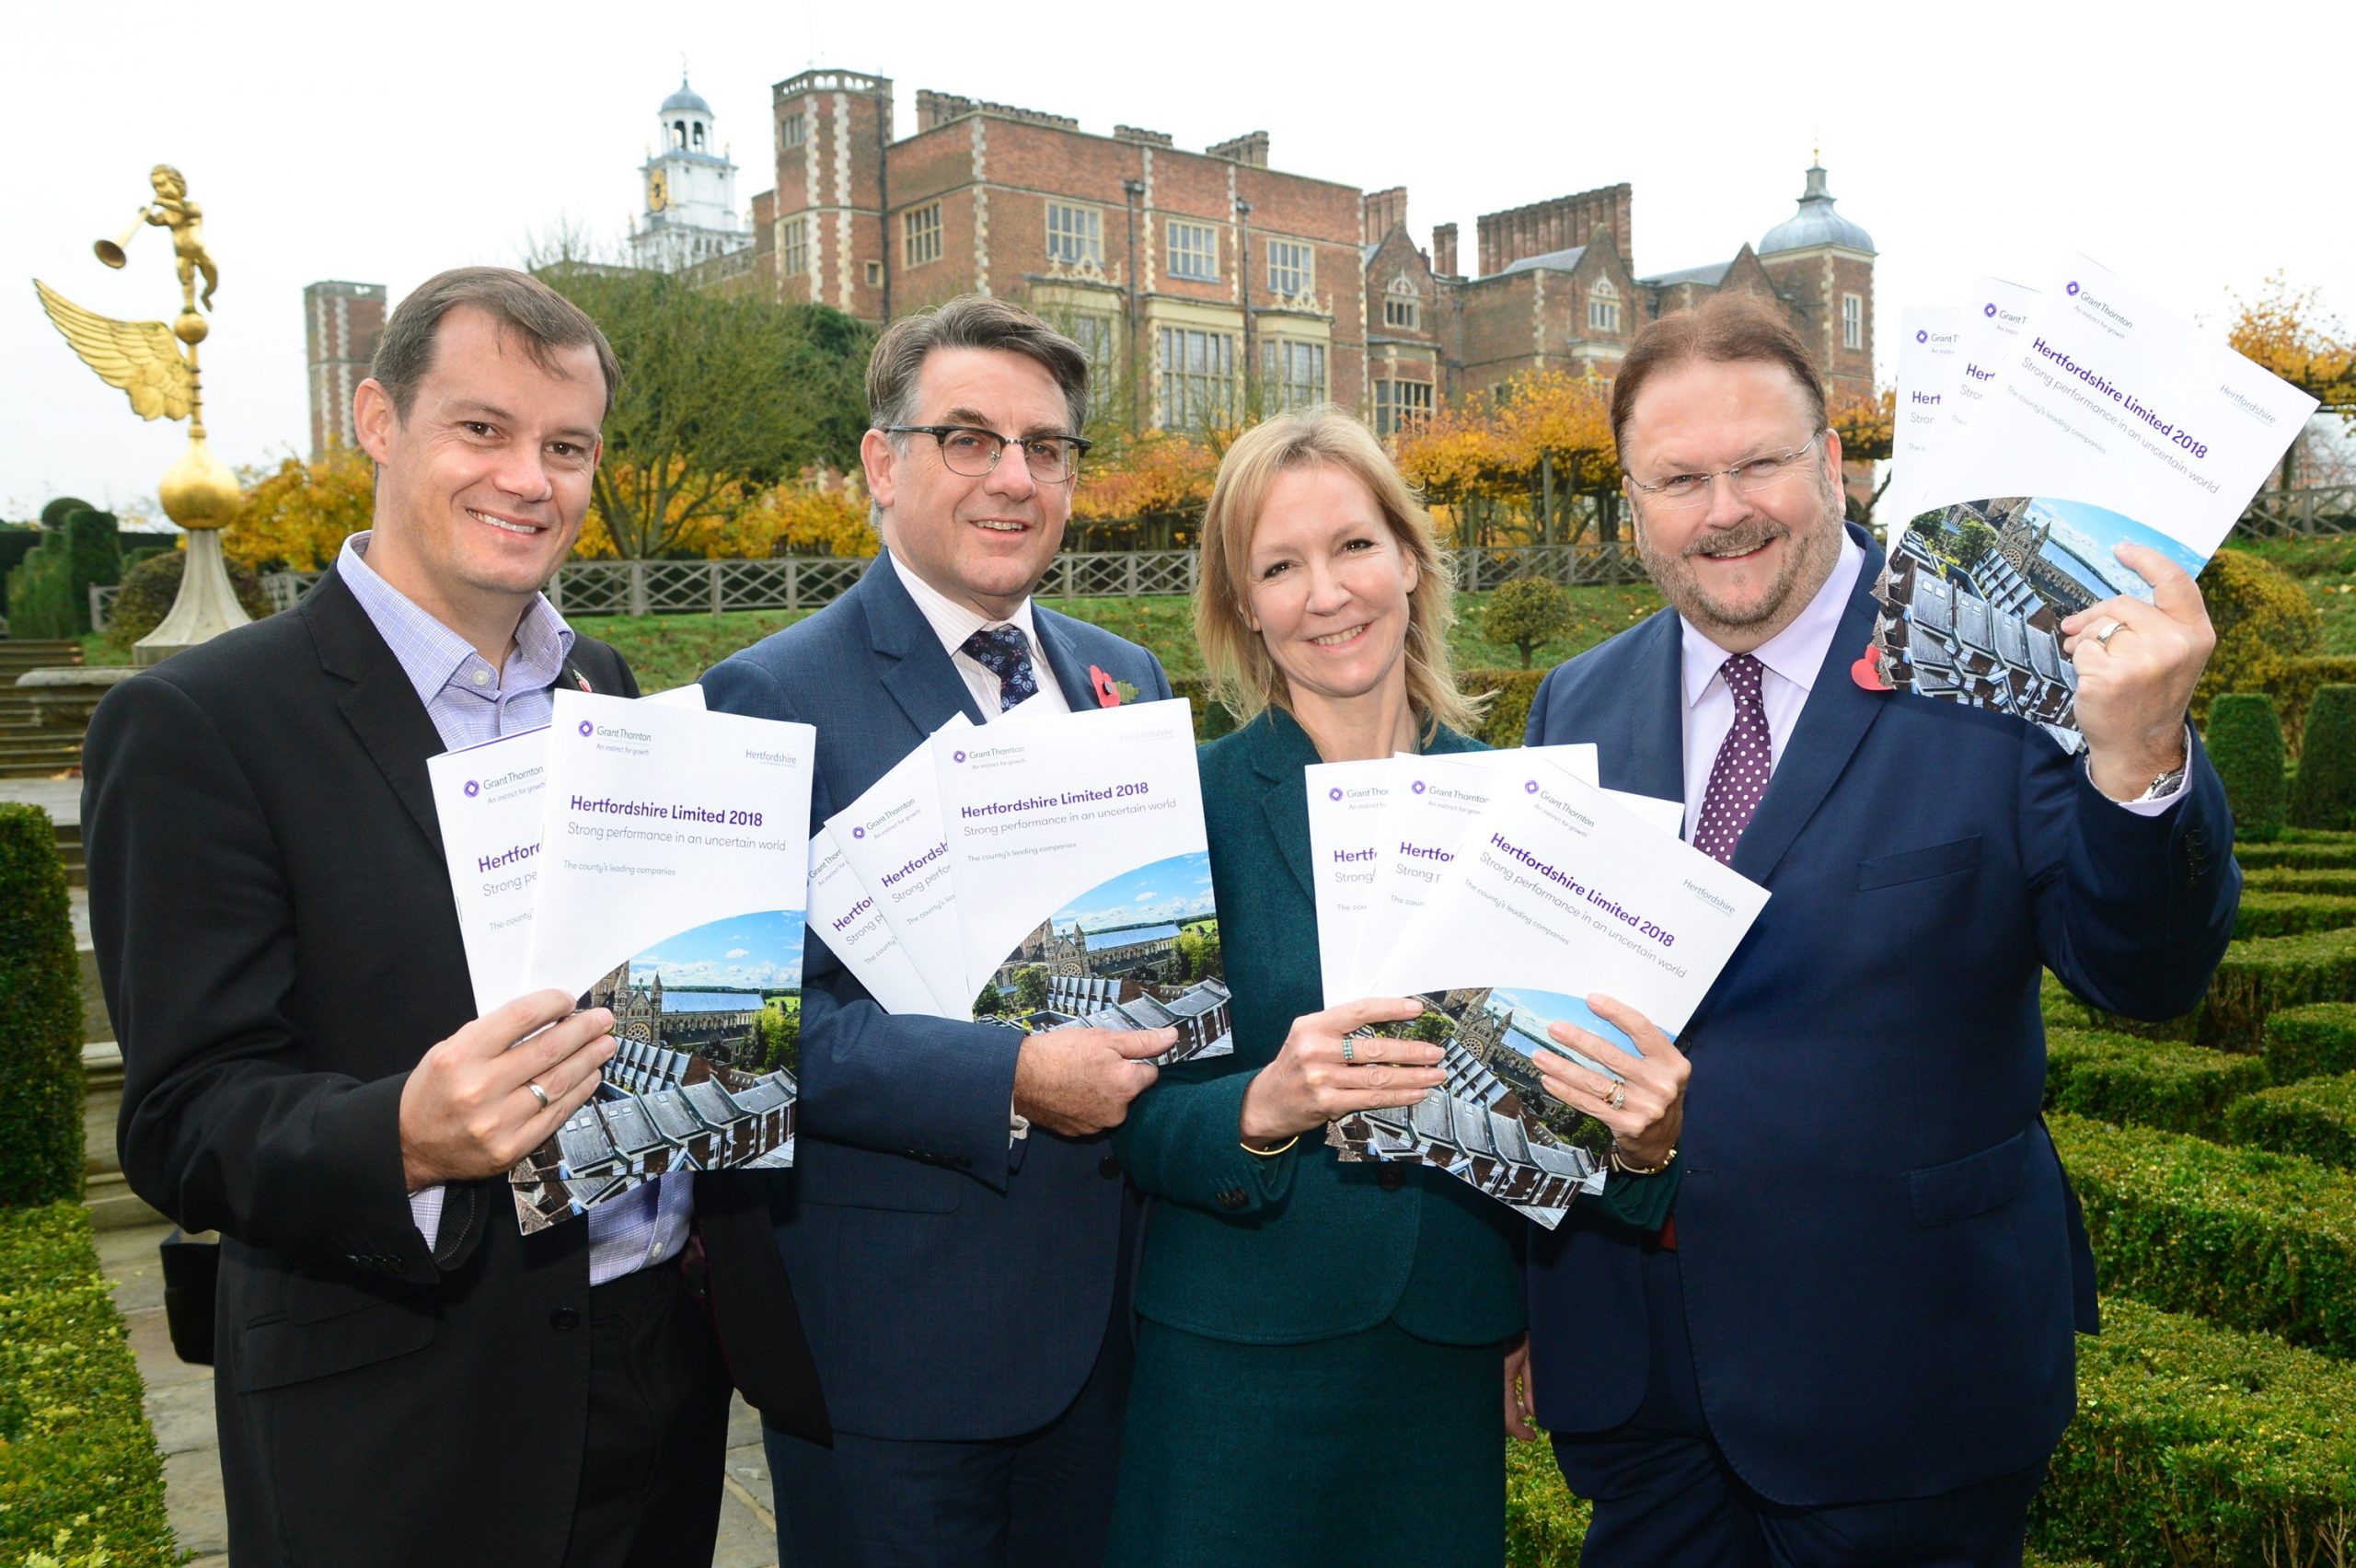 Strong performance for Hertfordshire businesses despite market uncertainty, says new report